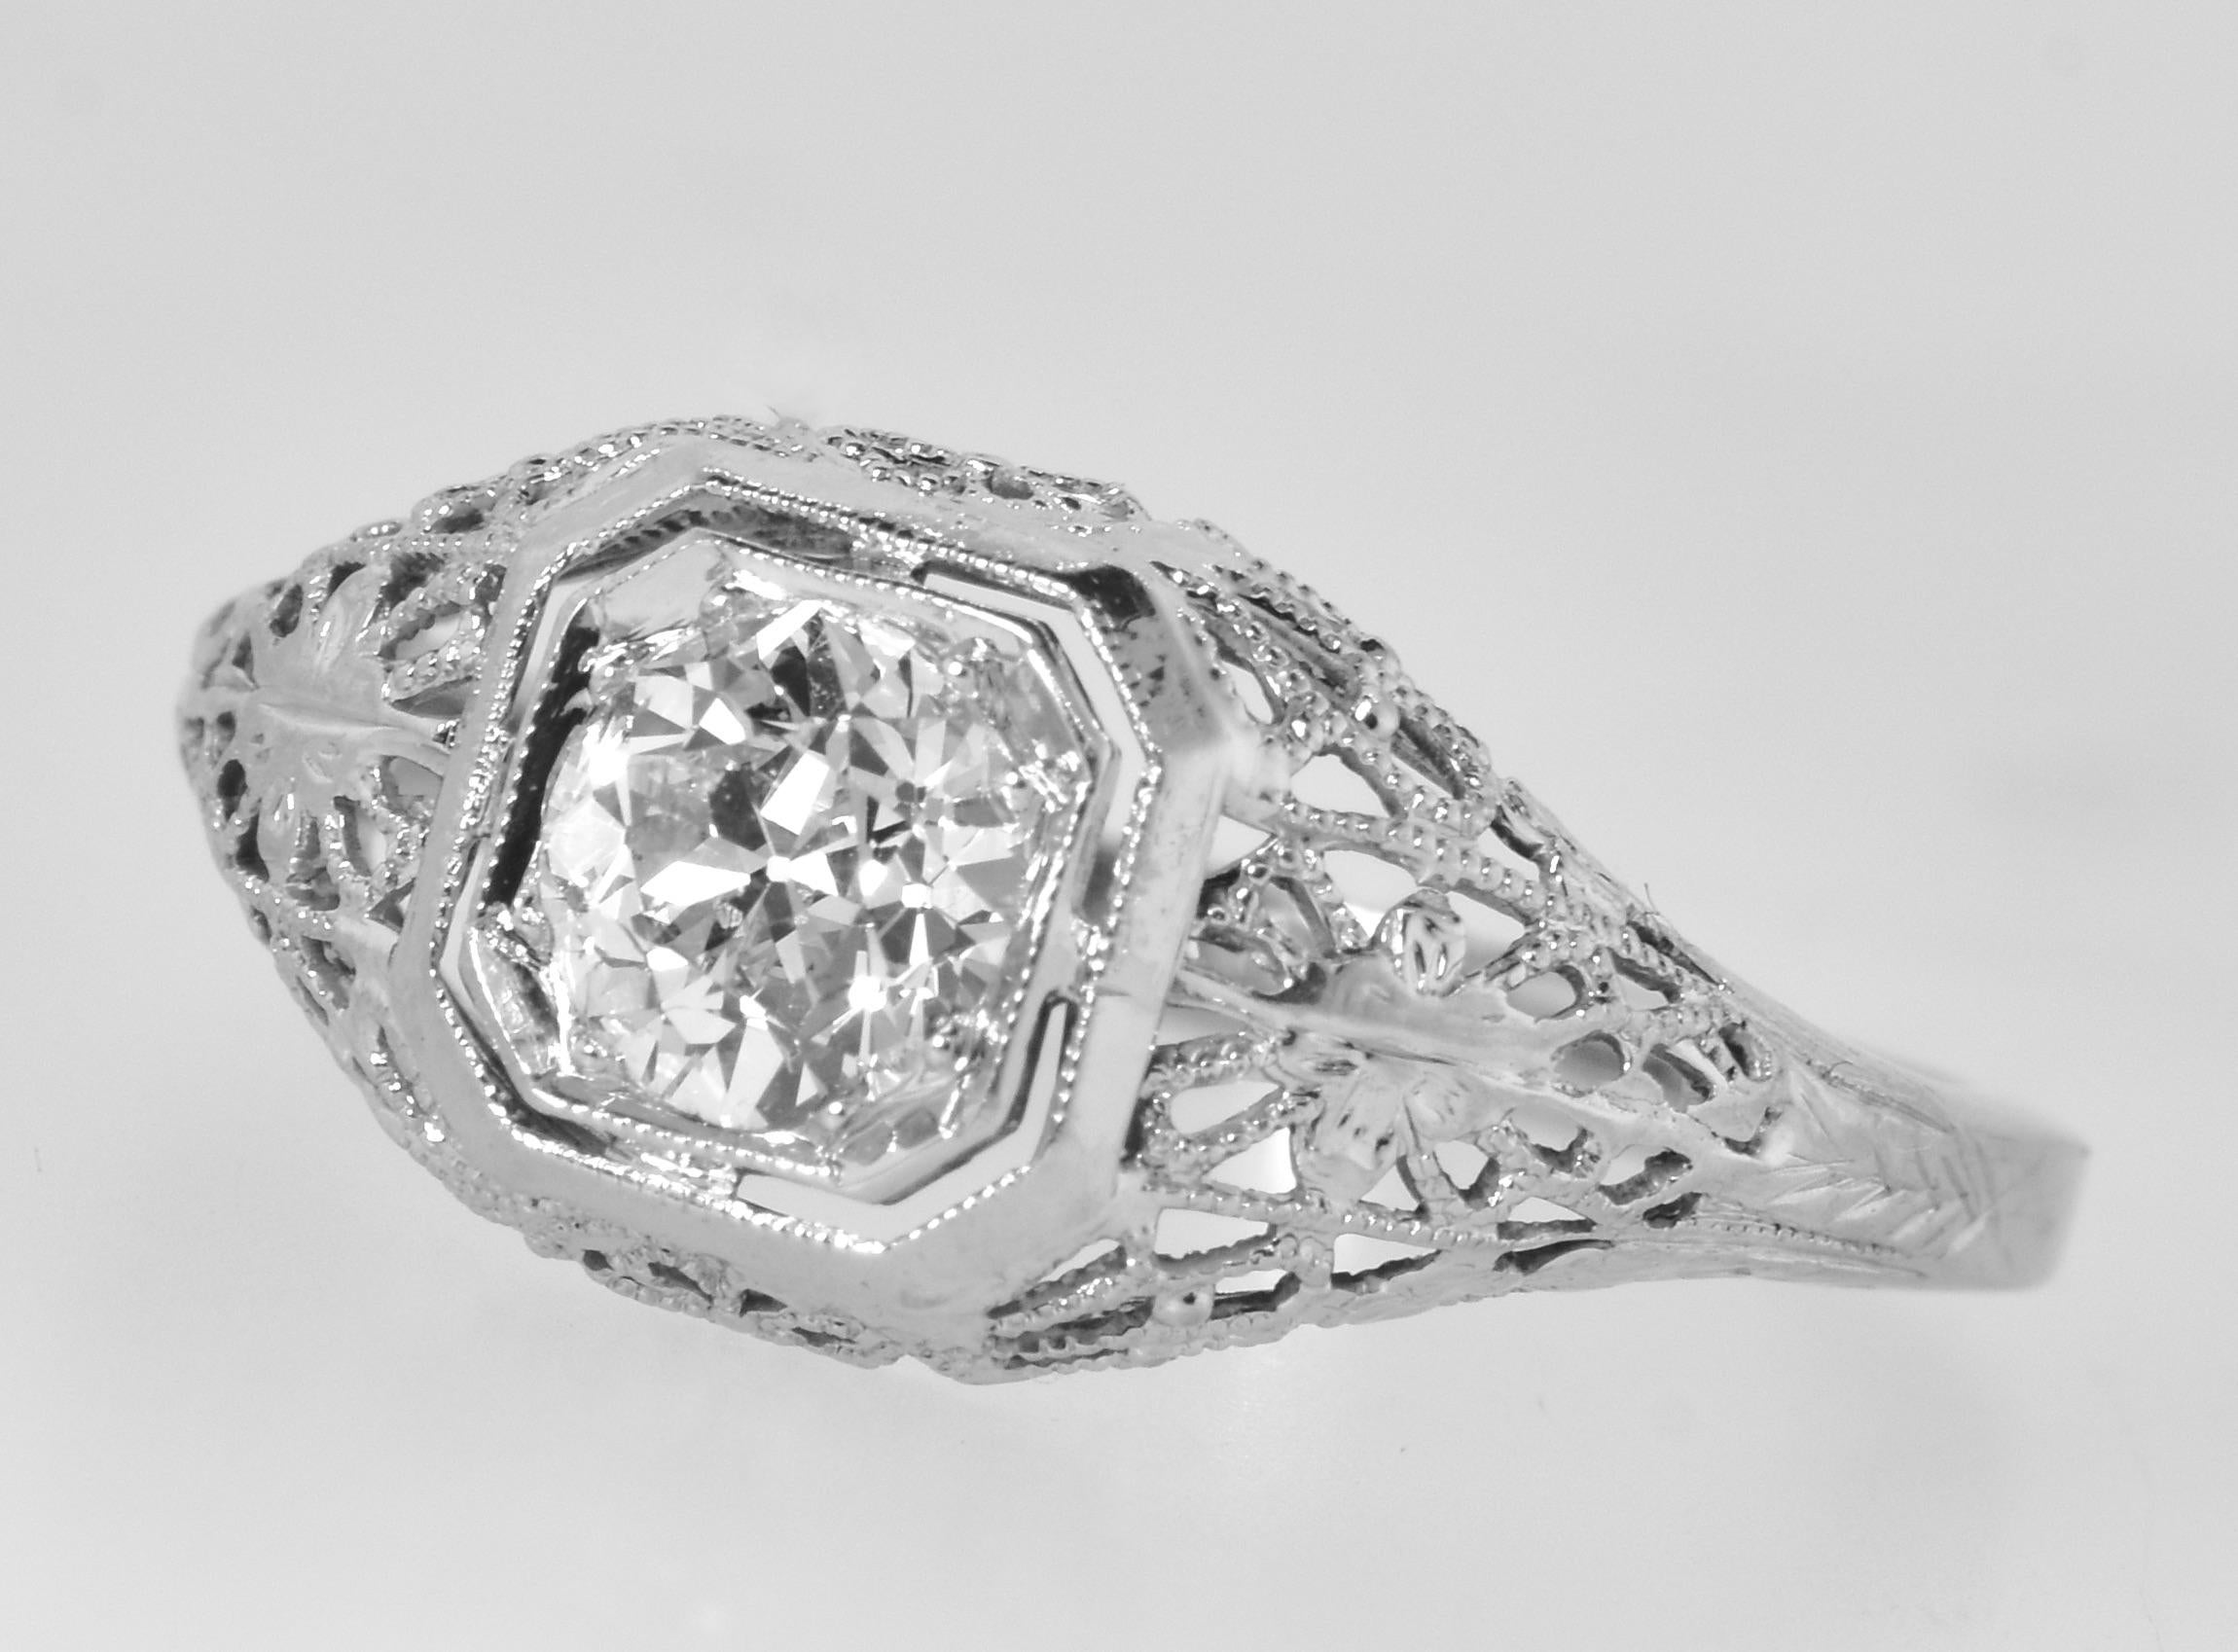 Antique Filigree Fine .65 Ct. Diamond and 18K White Gold Ring, American, c. 1920 In Excellent Condition For Sale In Aspen, CO